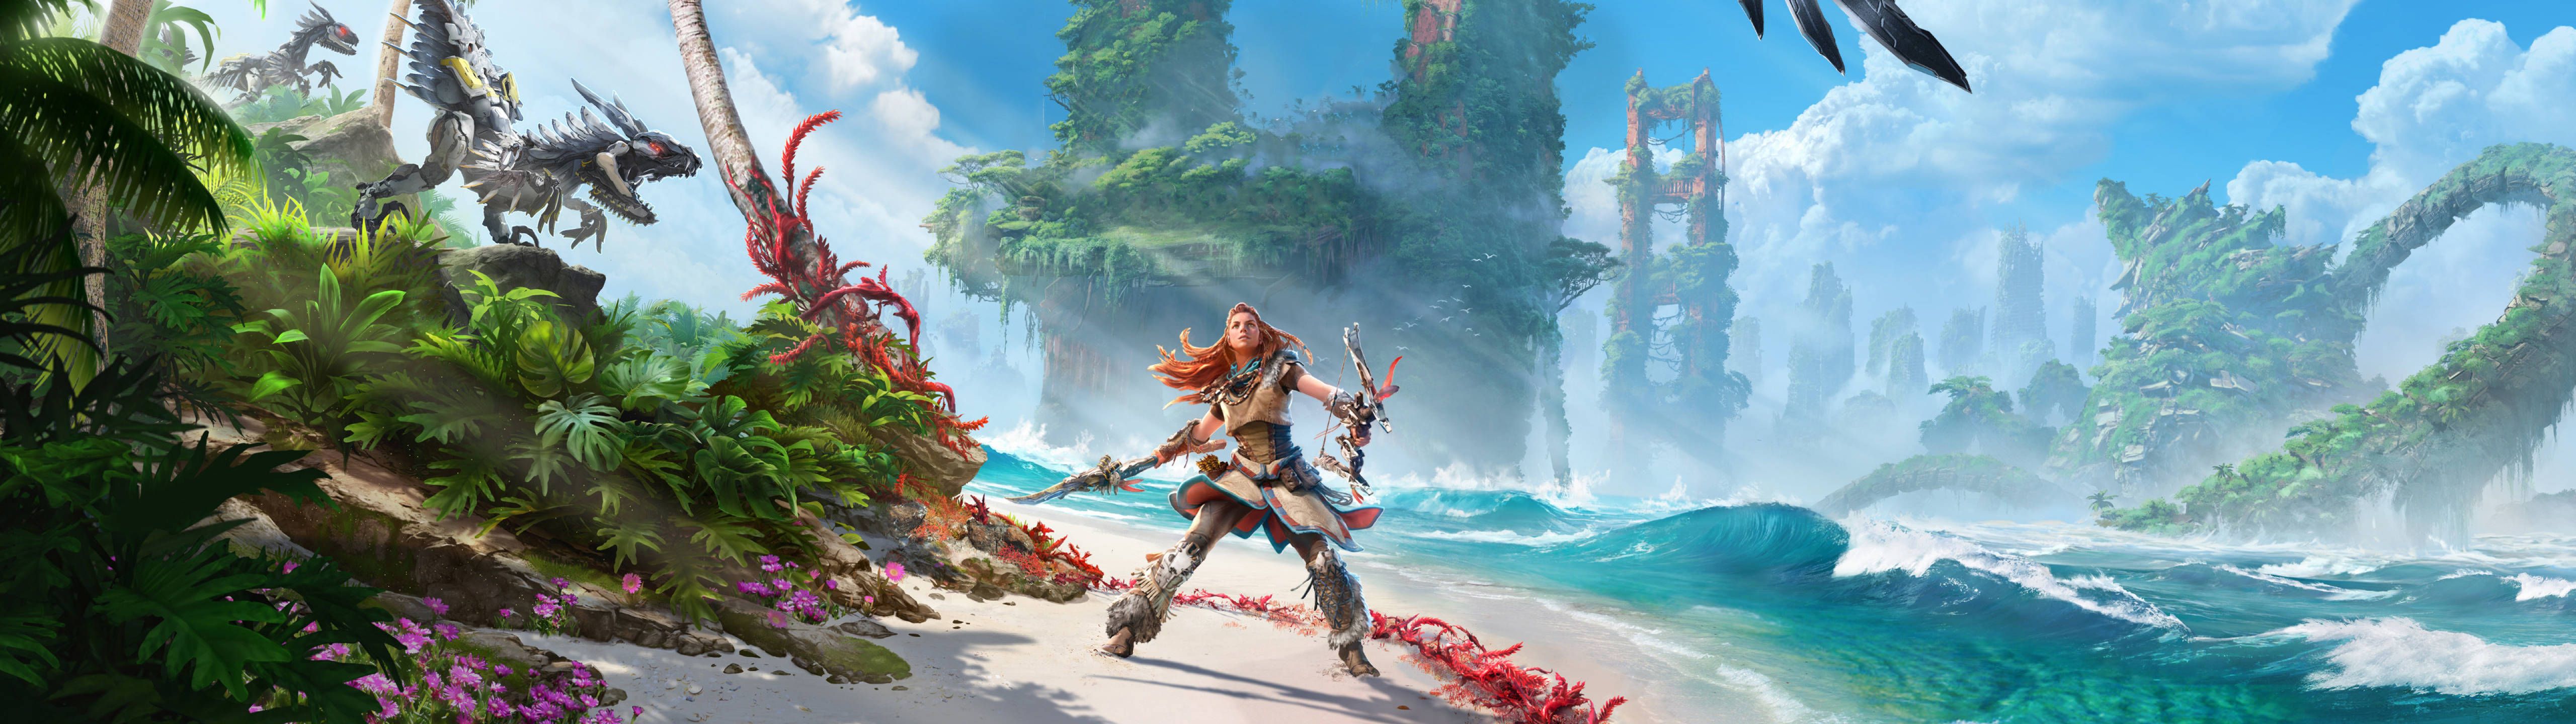 Aloy stands on a beach with her bow and quiver, looking out at the sea. Two machines are visible in the distance. - 5120x1440